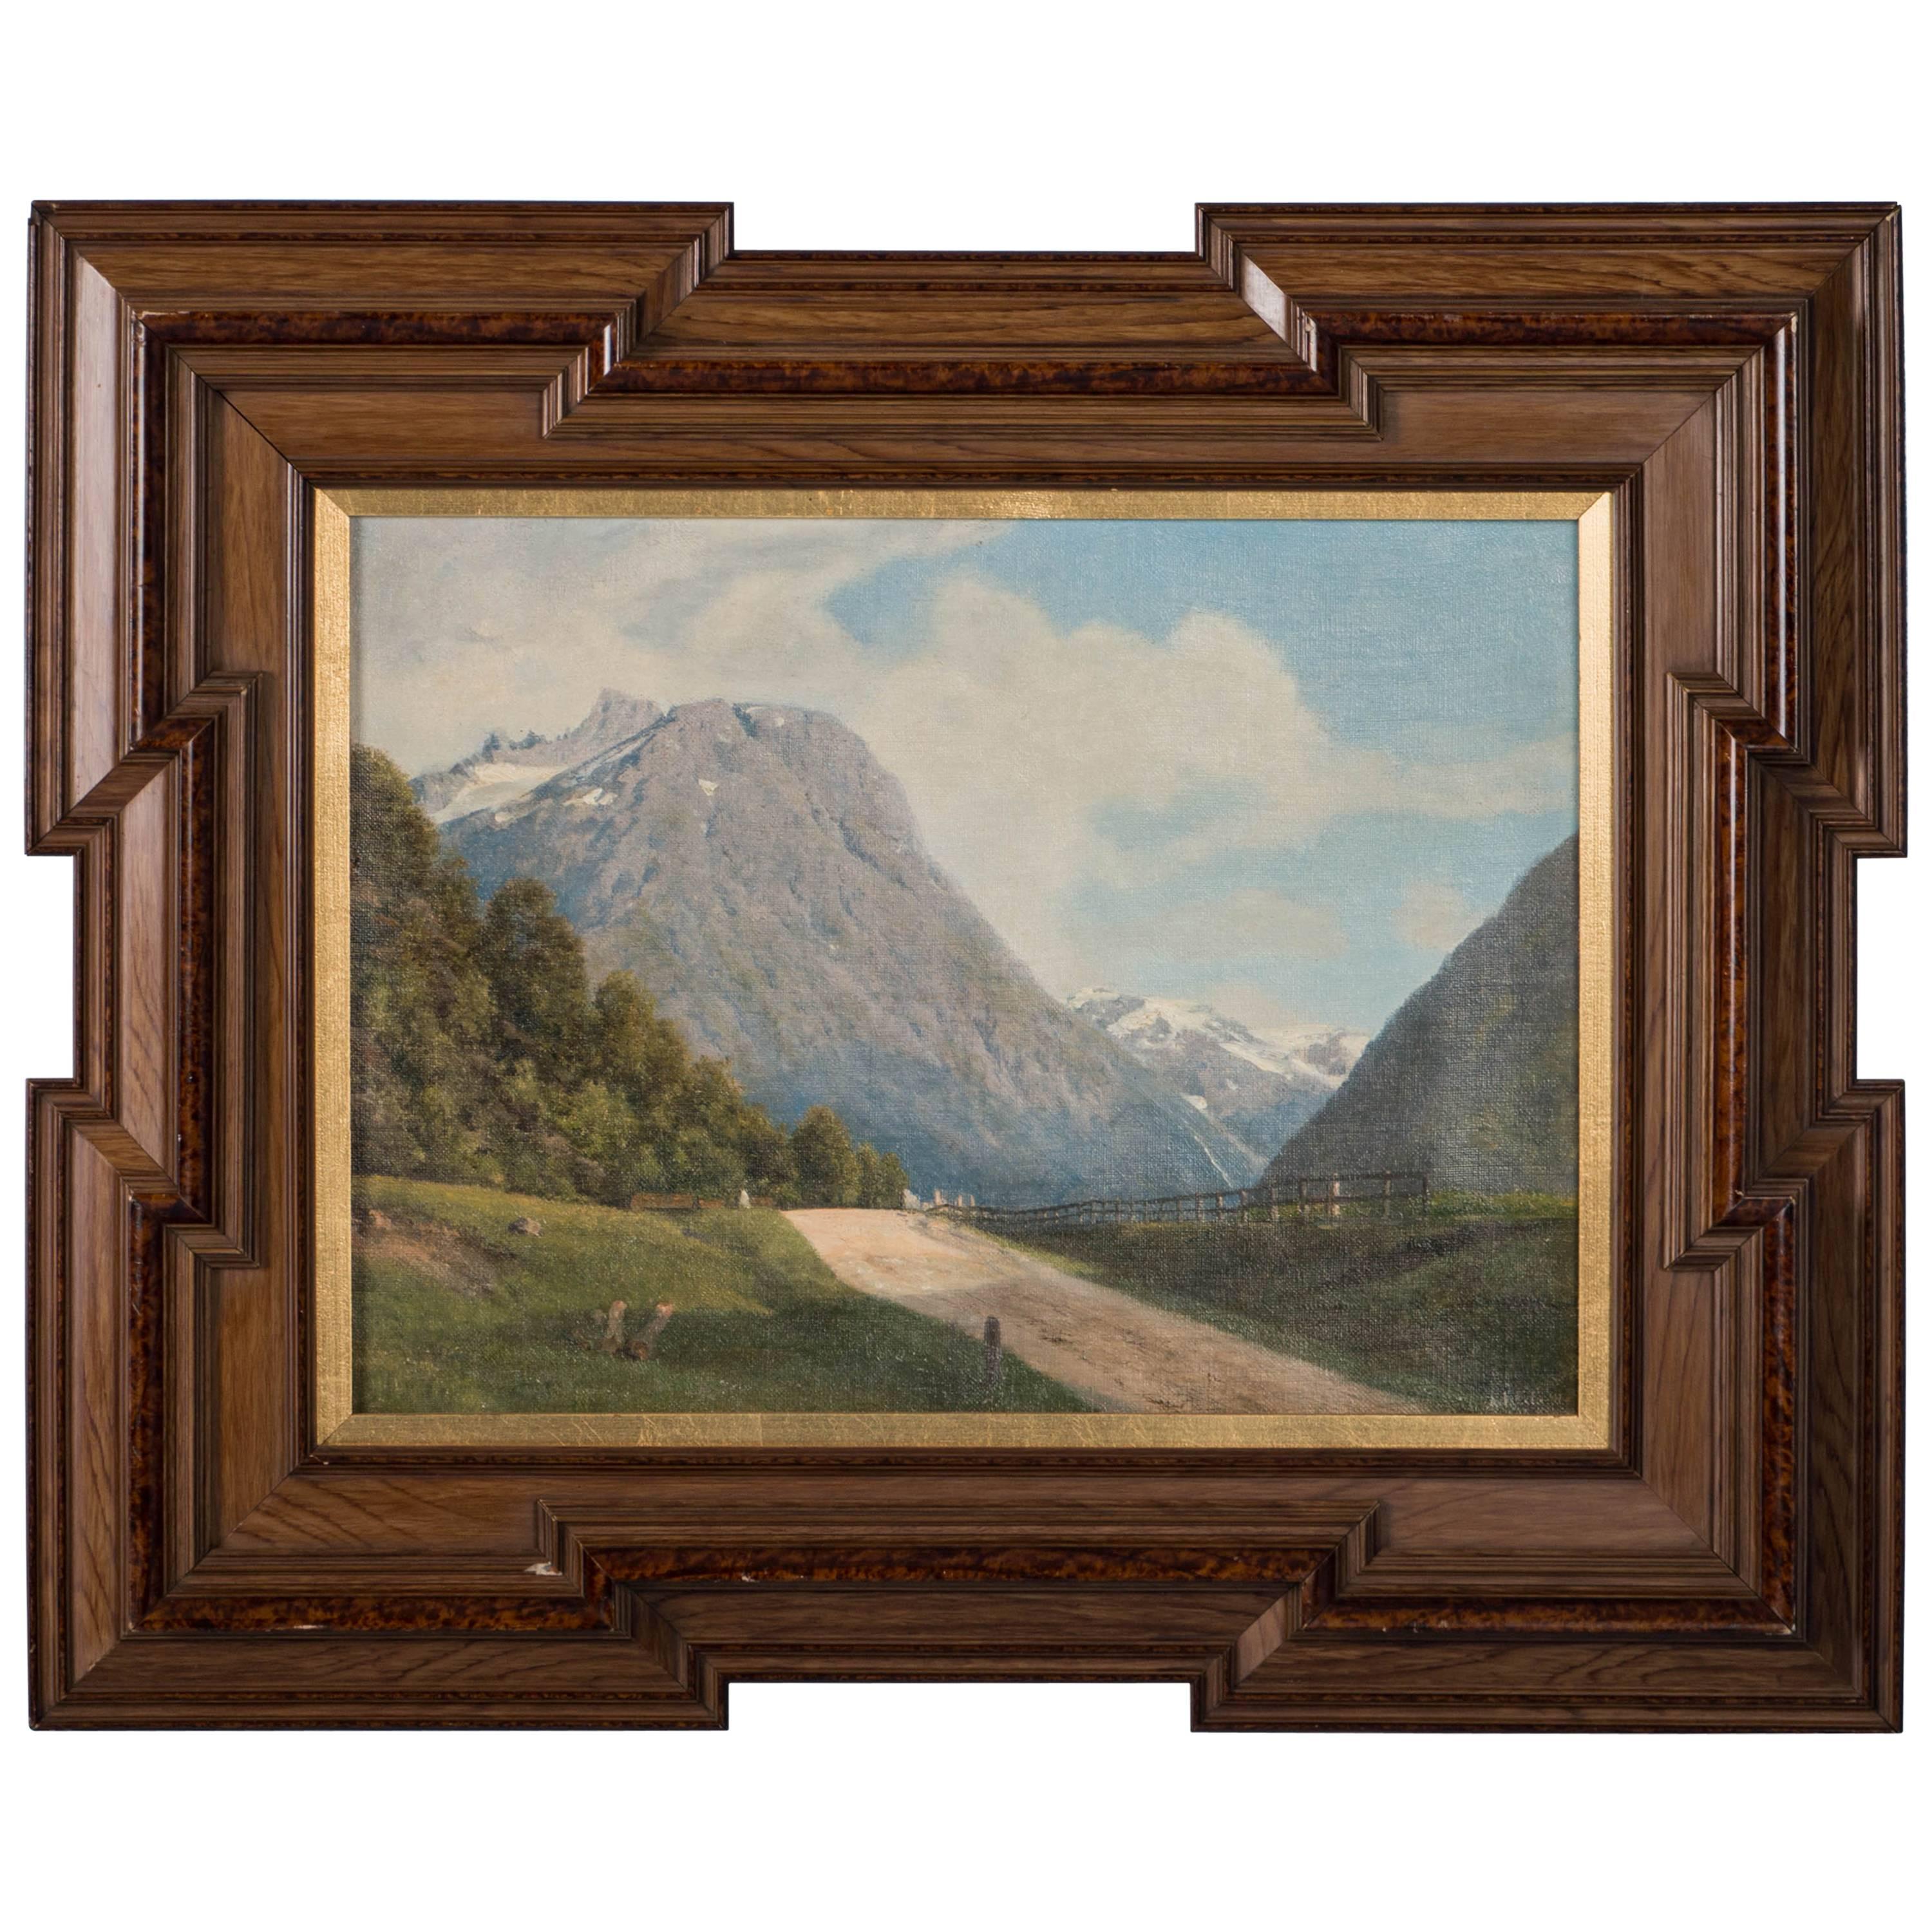 Antique Oil on Canvas Painting of a Norwegian Landscape, Signed Georg E Libart